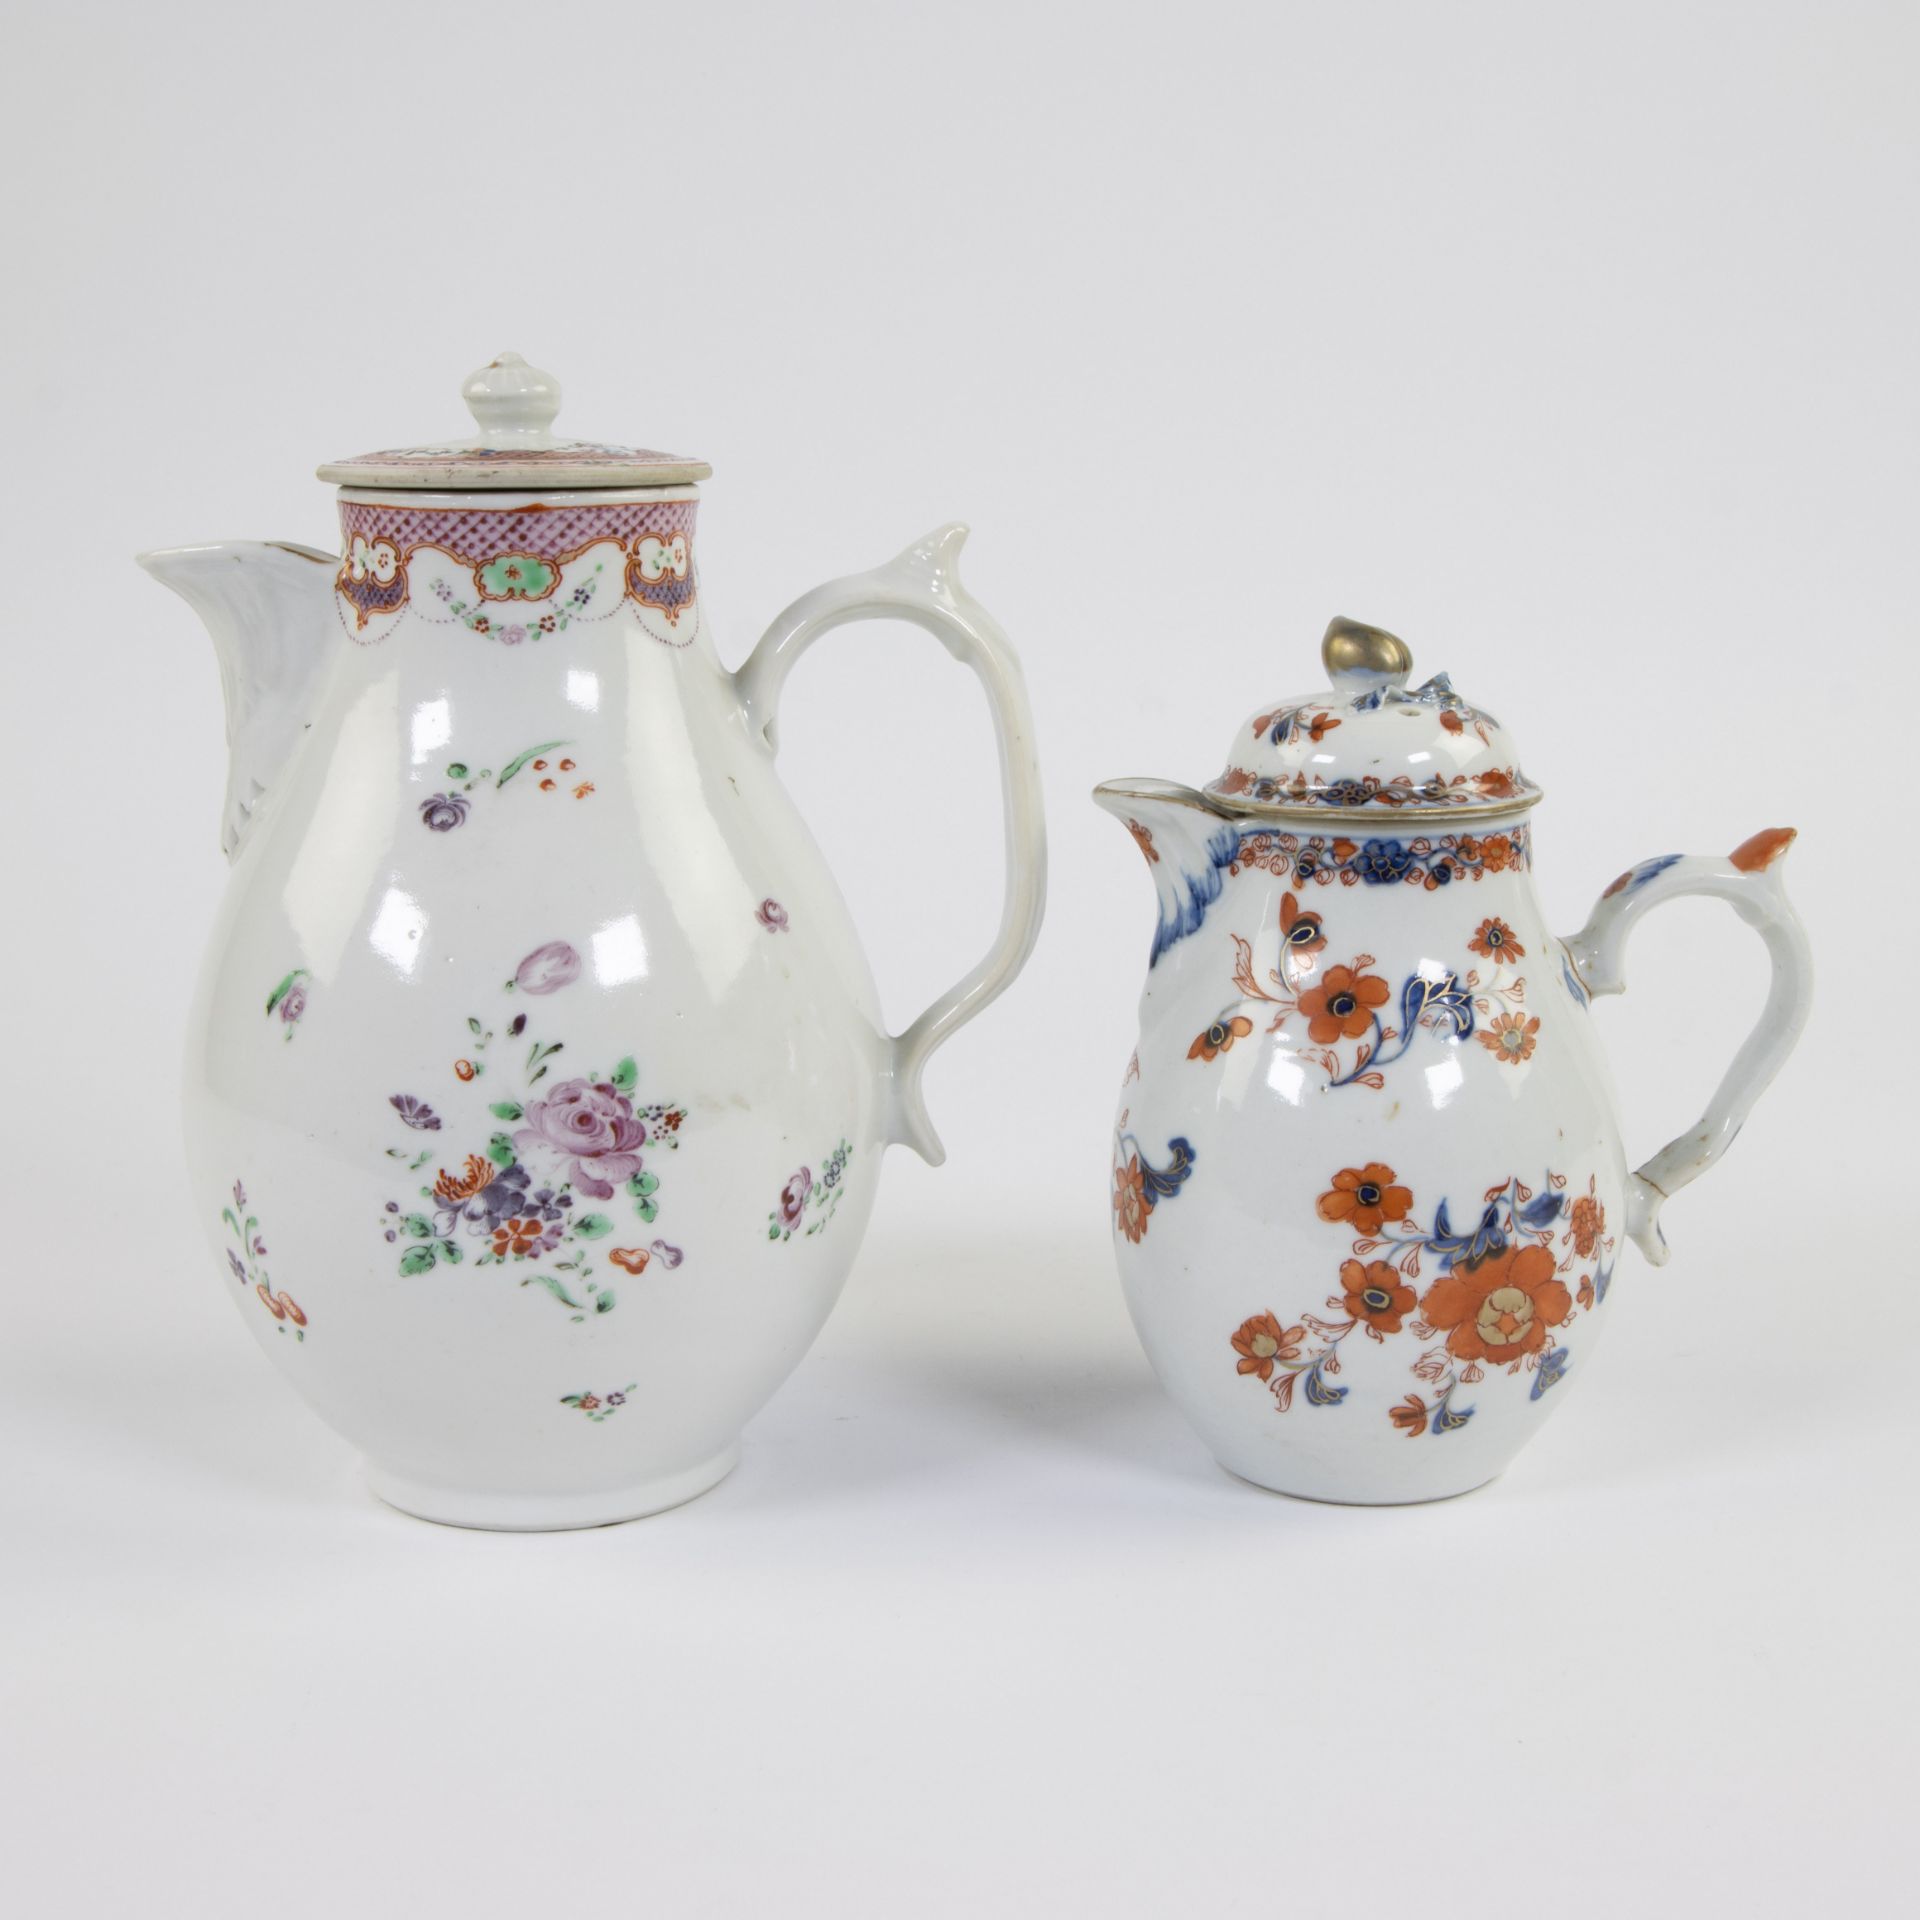 Collection of 2 Chinese teapots famille rose and Imari, 18th century